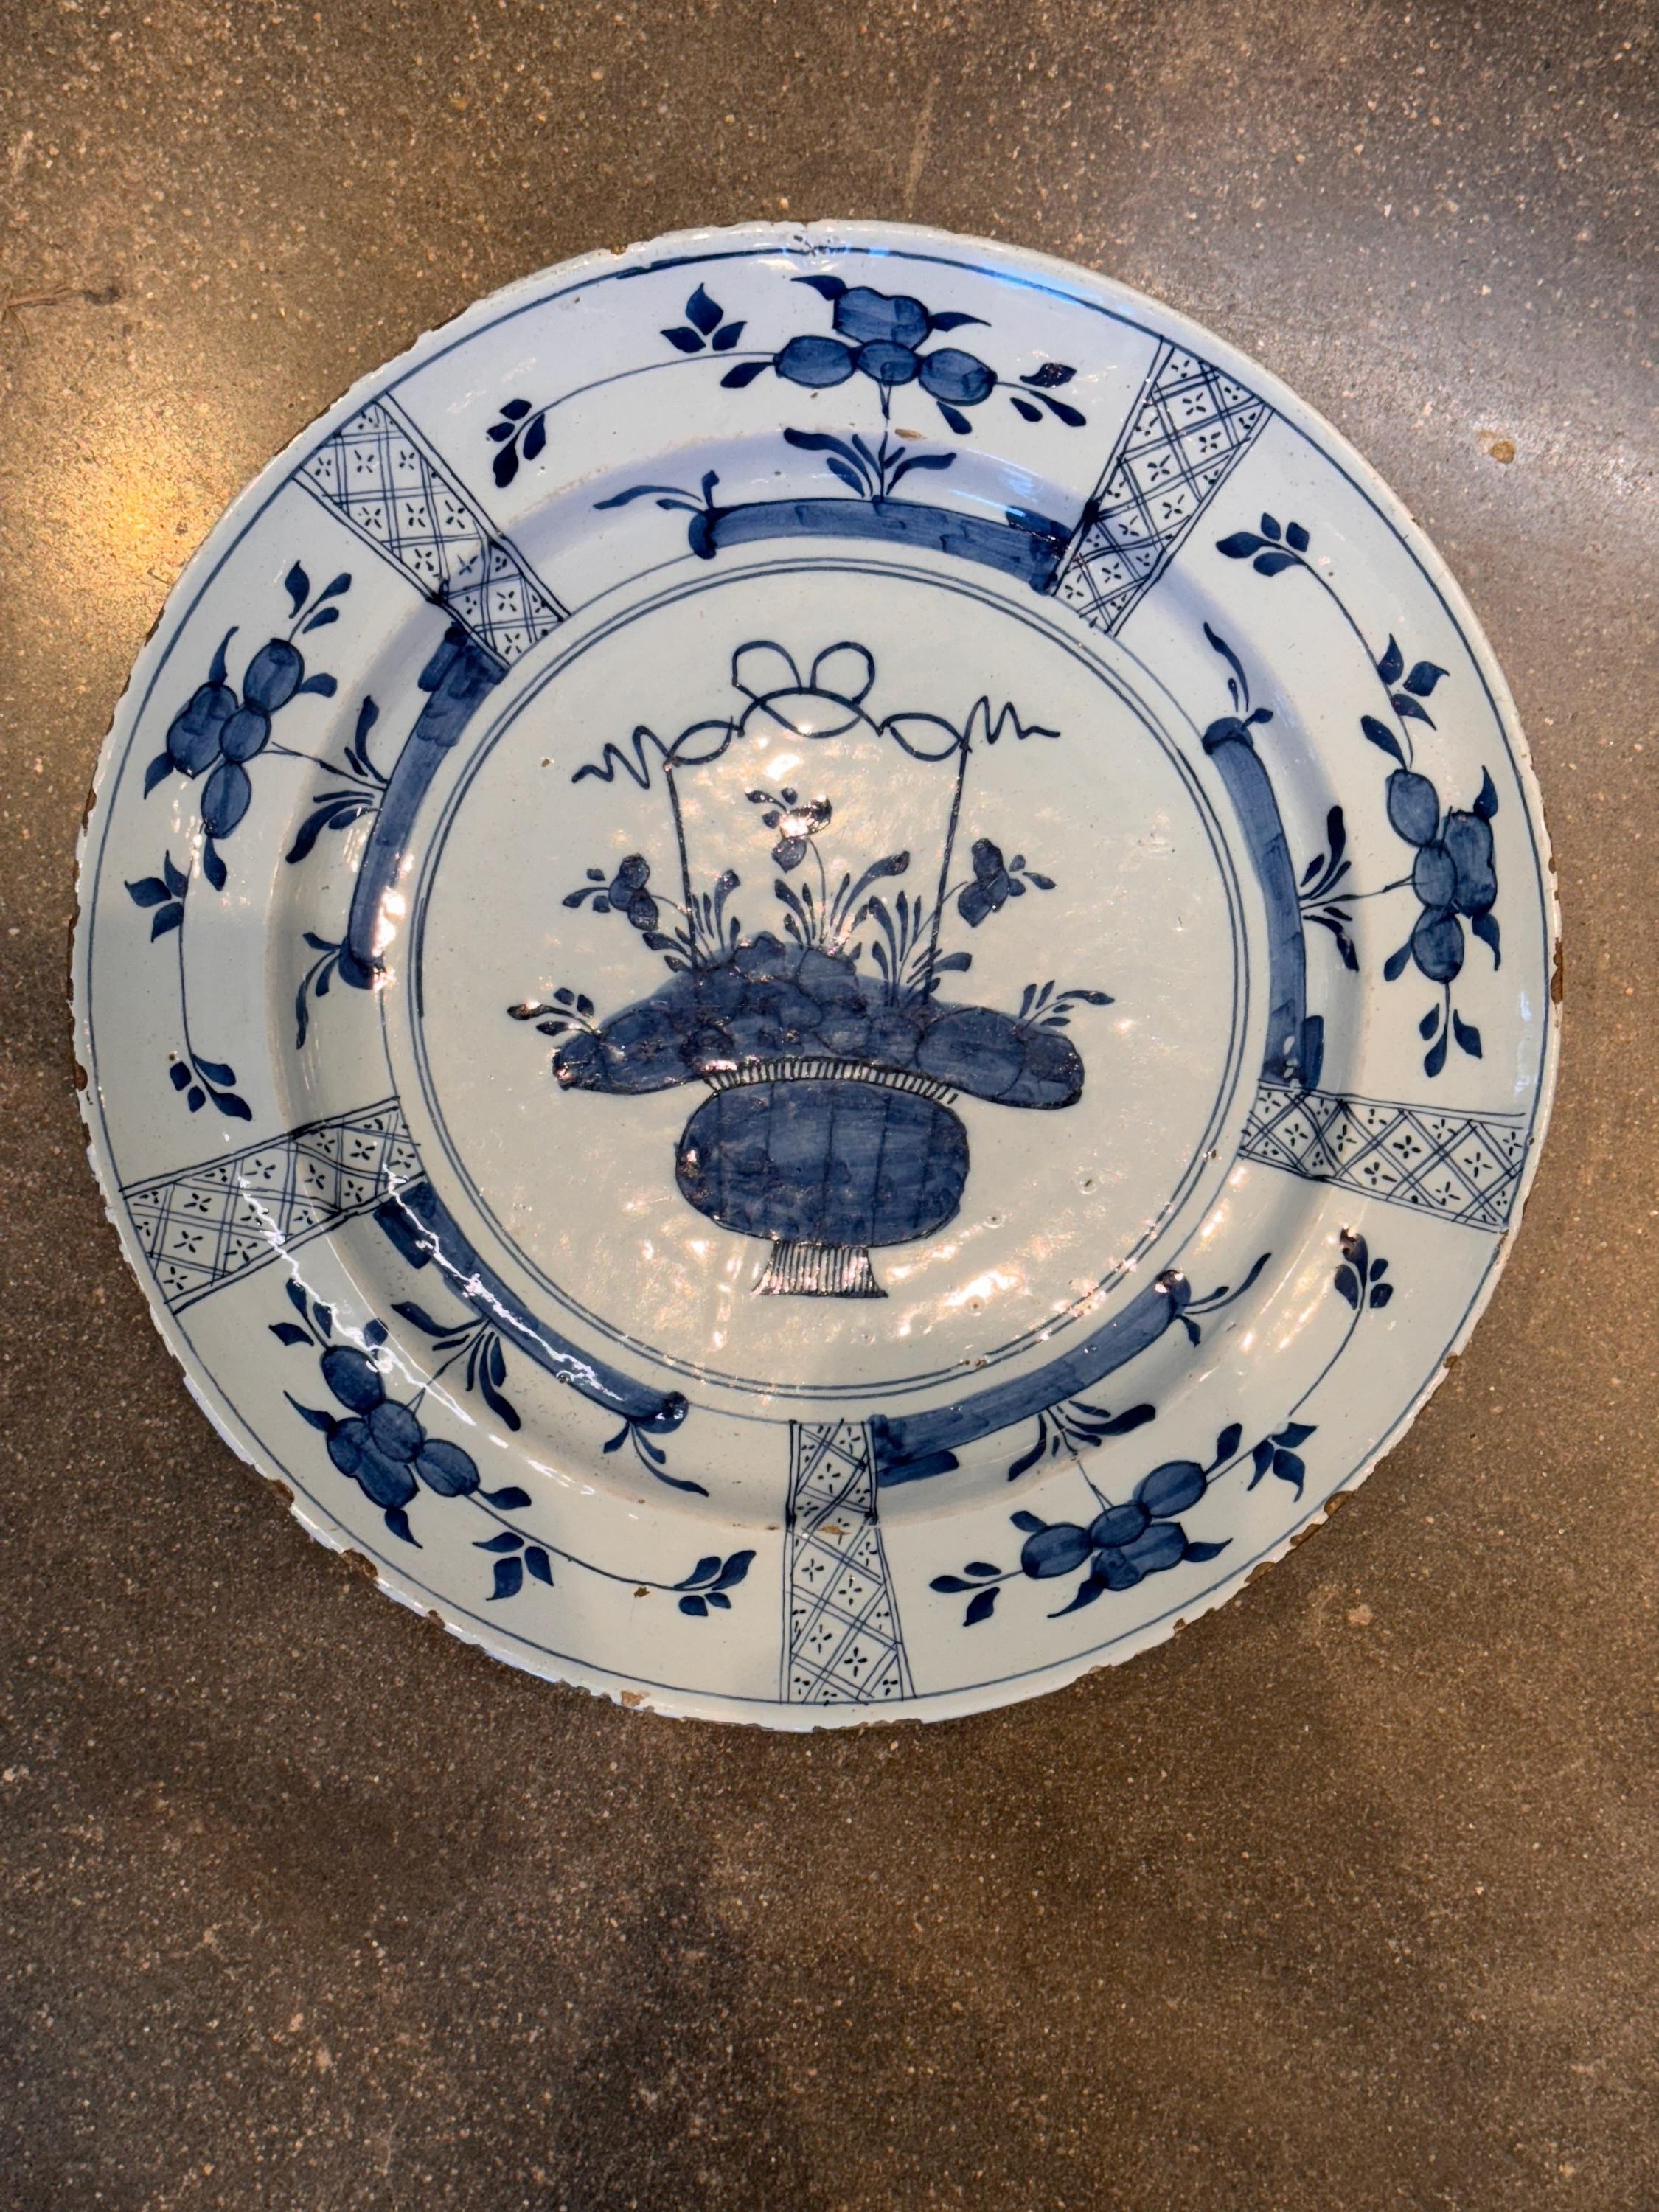 A beautiful Delft Charger. Great color and decoration.